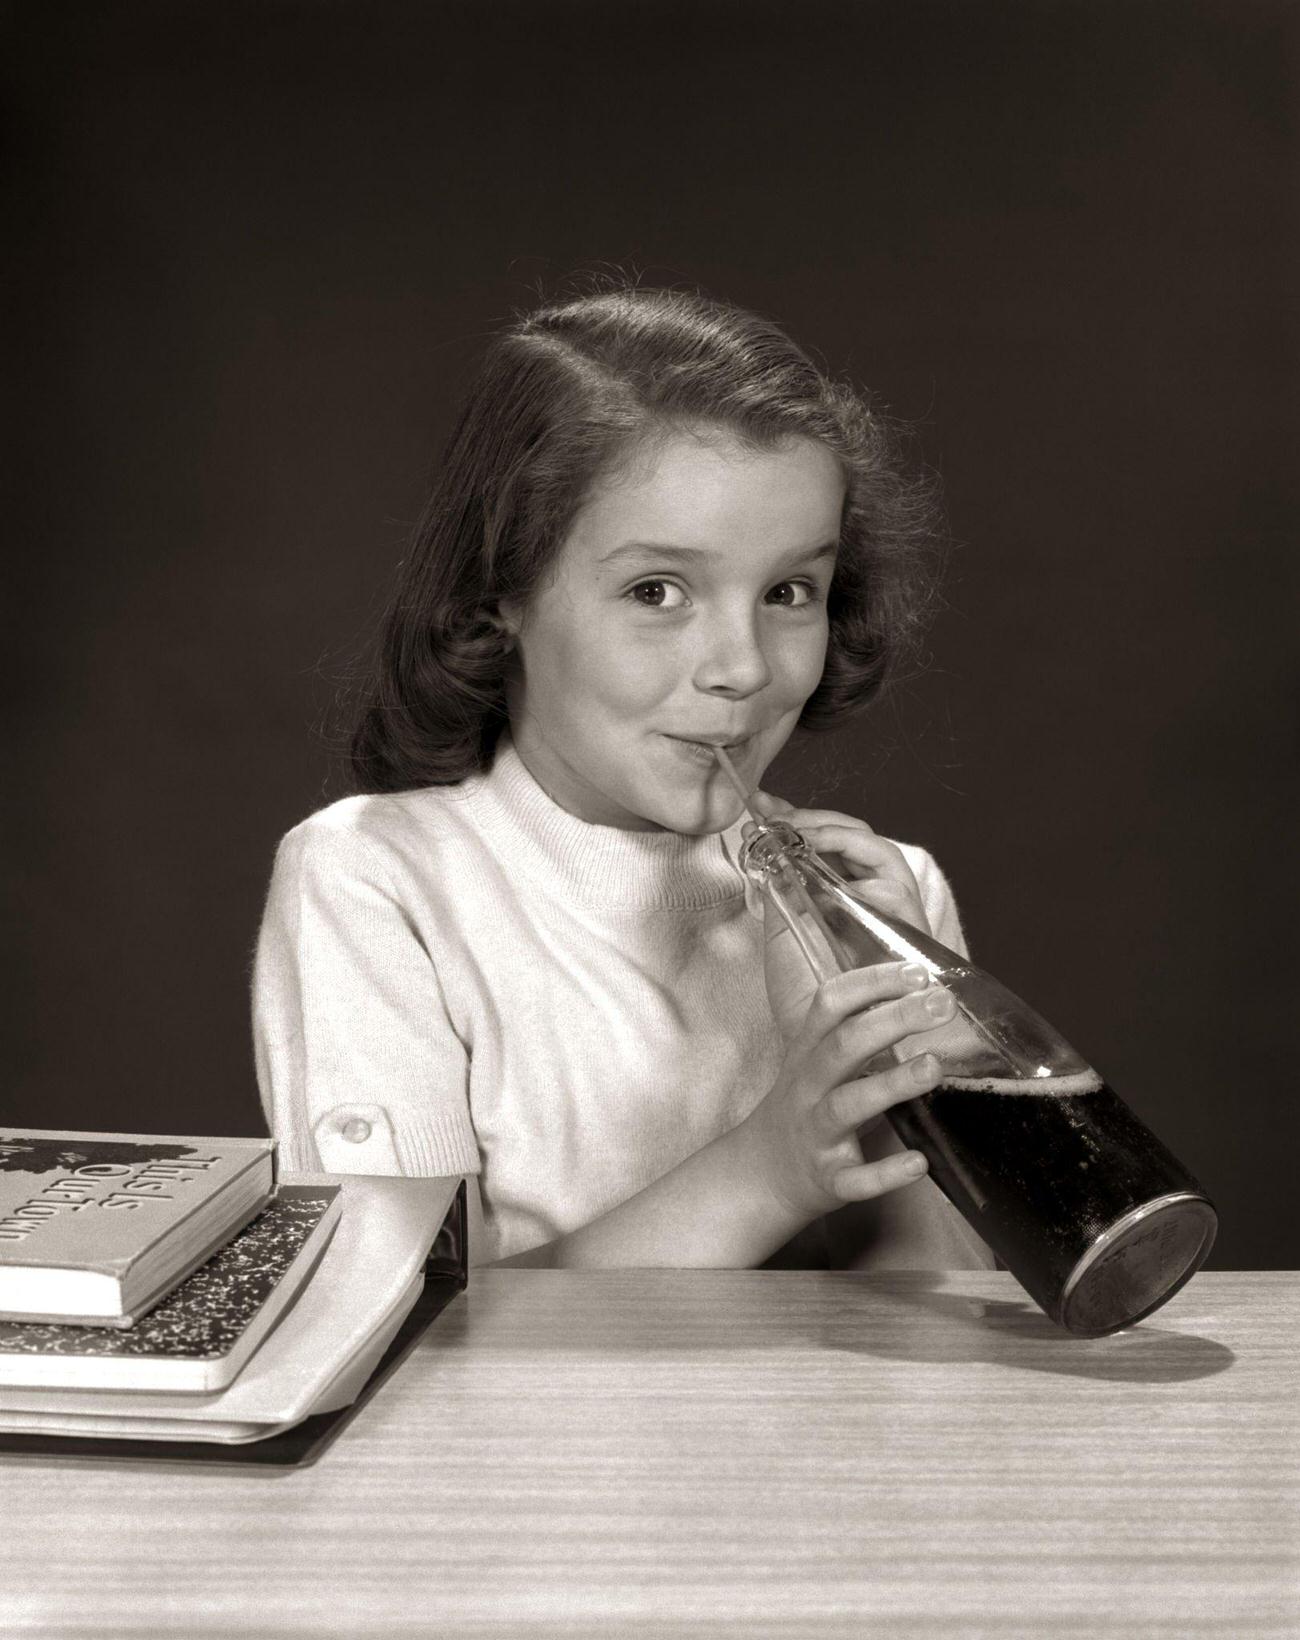 Smiling school girl drinking a carbonated beverage from a bottle, 1950s